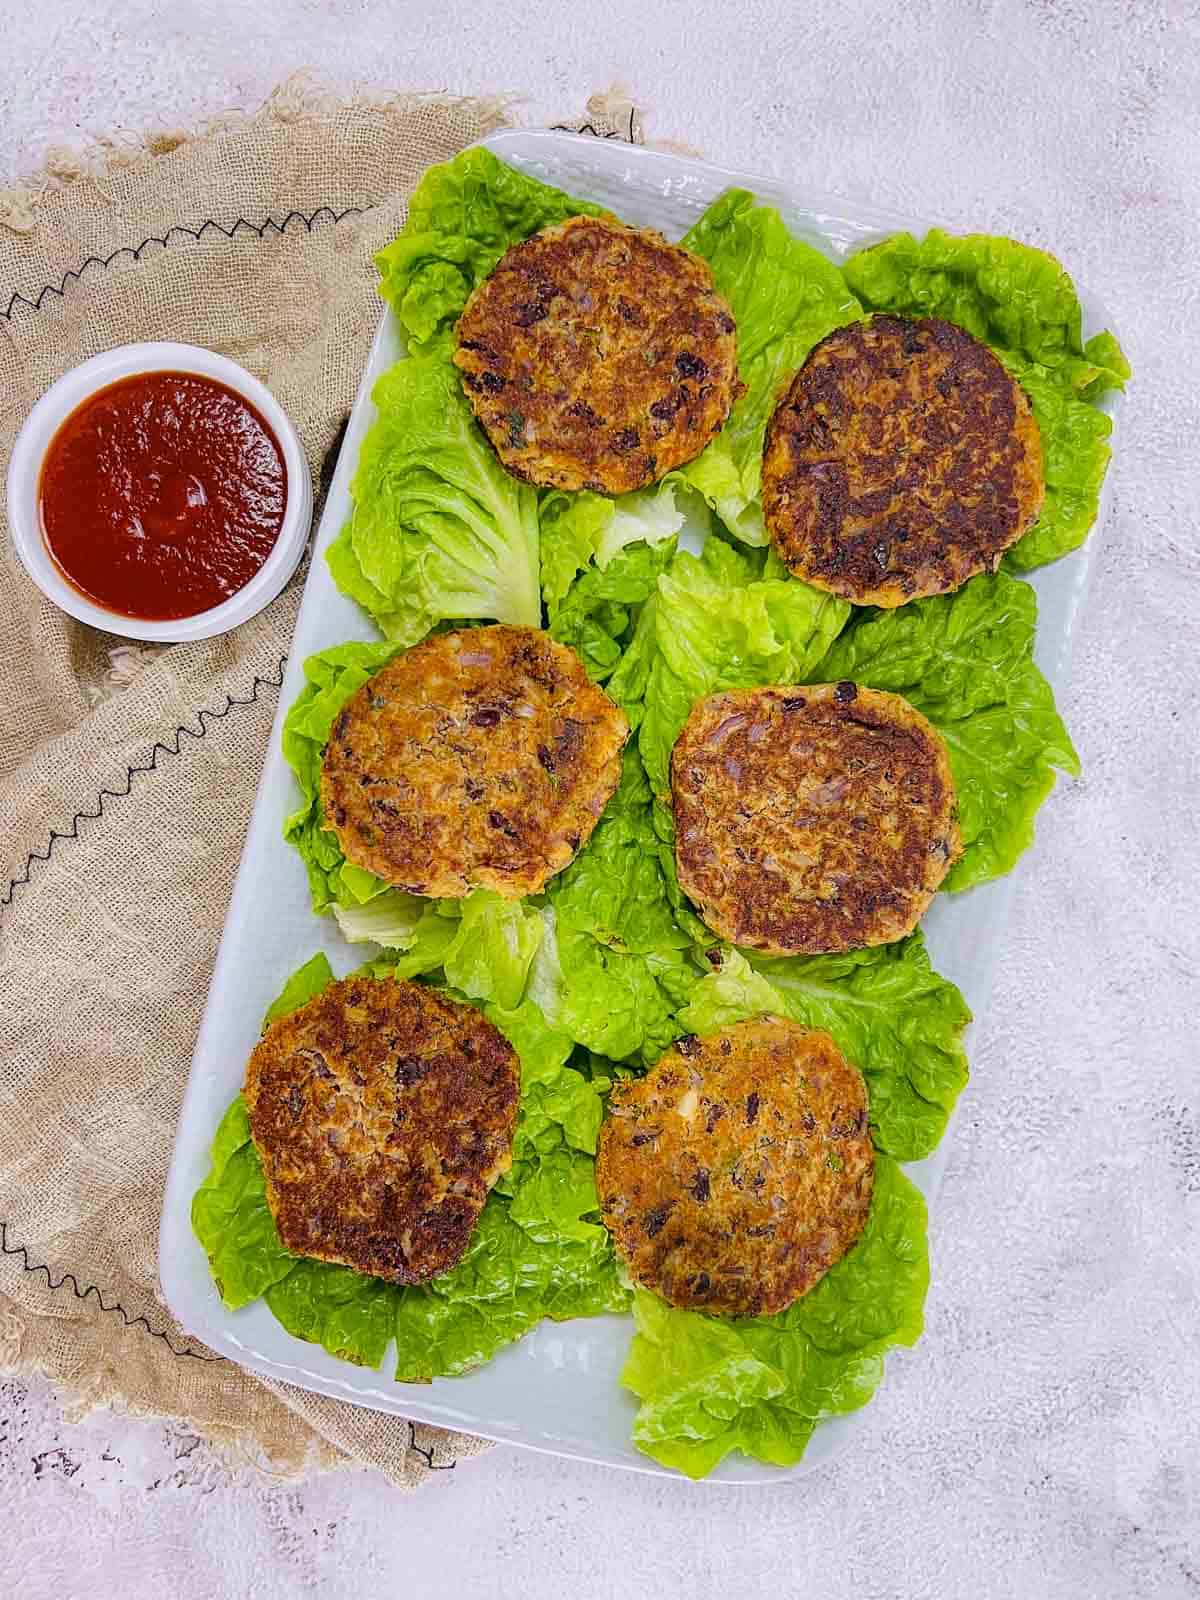 Kidney bean patties and lettuce leaves on white plate.